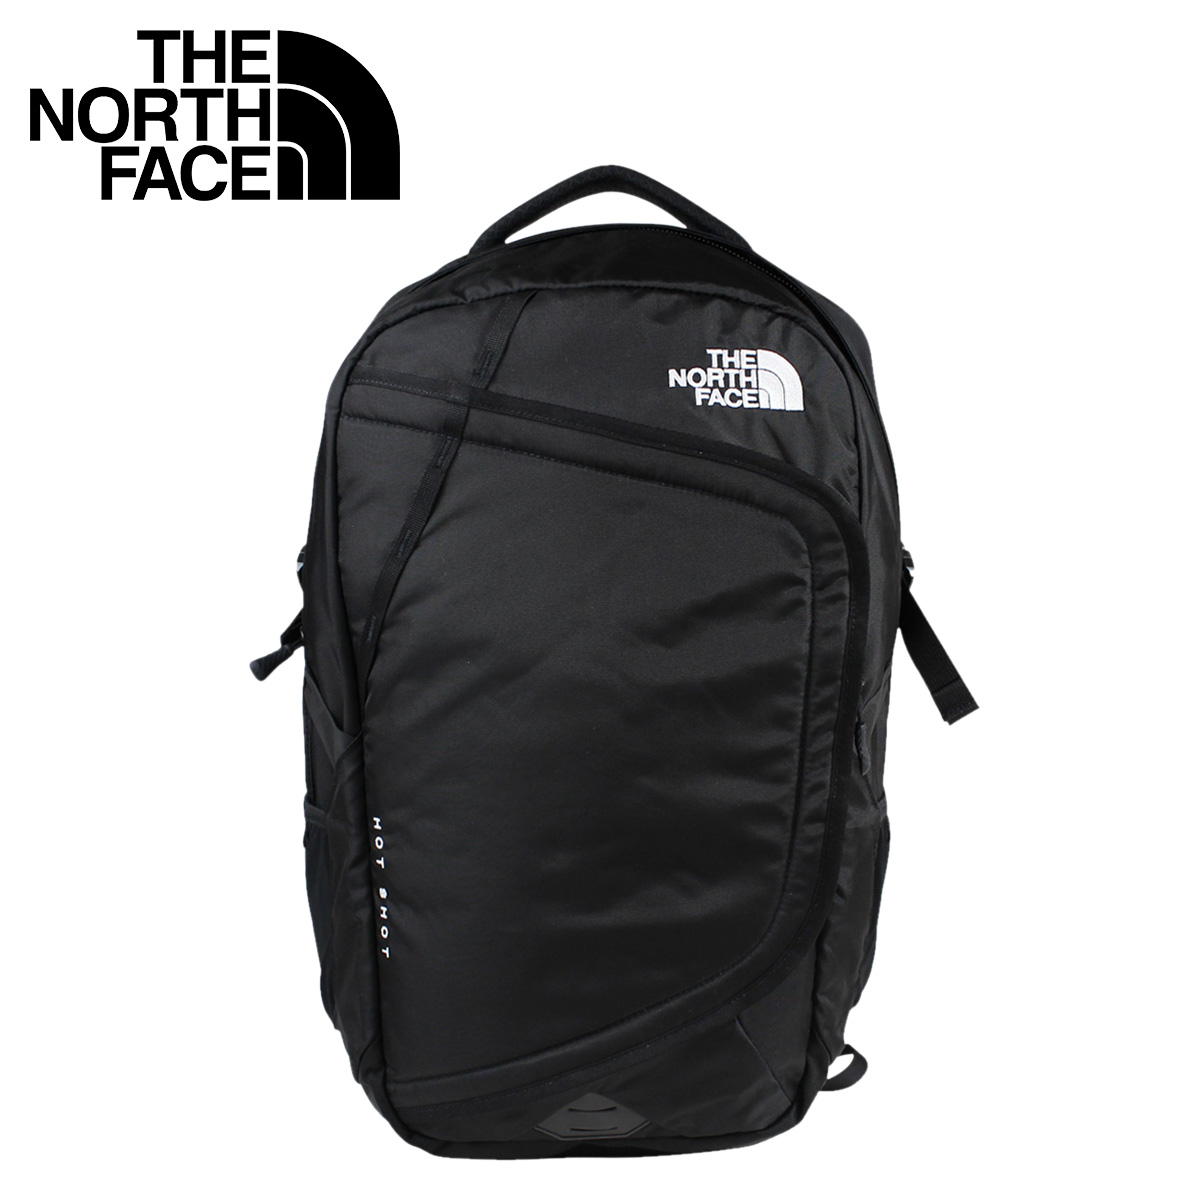 The North Face Hot Shot Backpack Online Shopping For Women Men Kids Fashion Lifestyle Free Delivery Returns